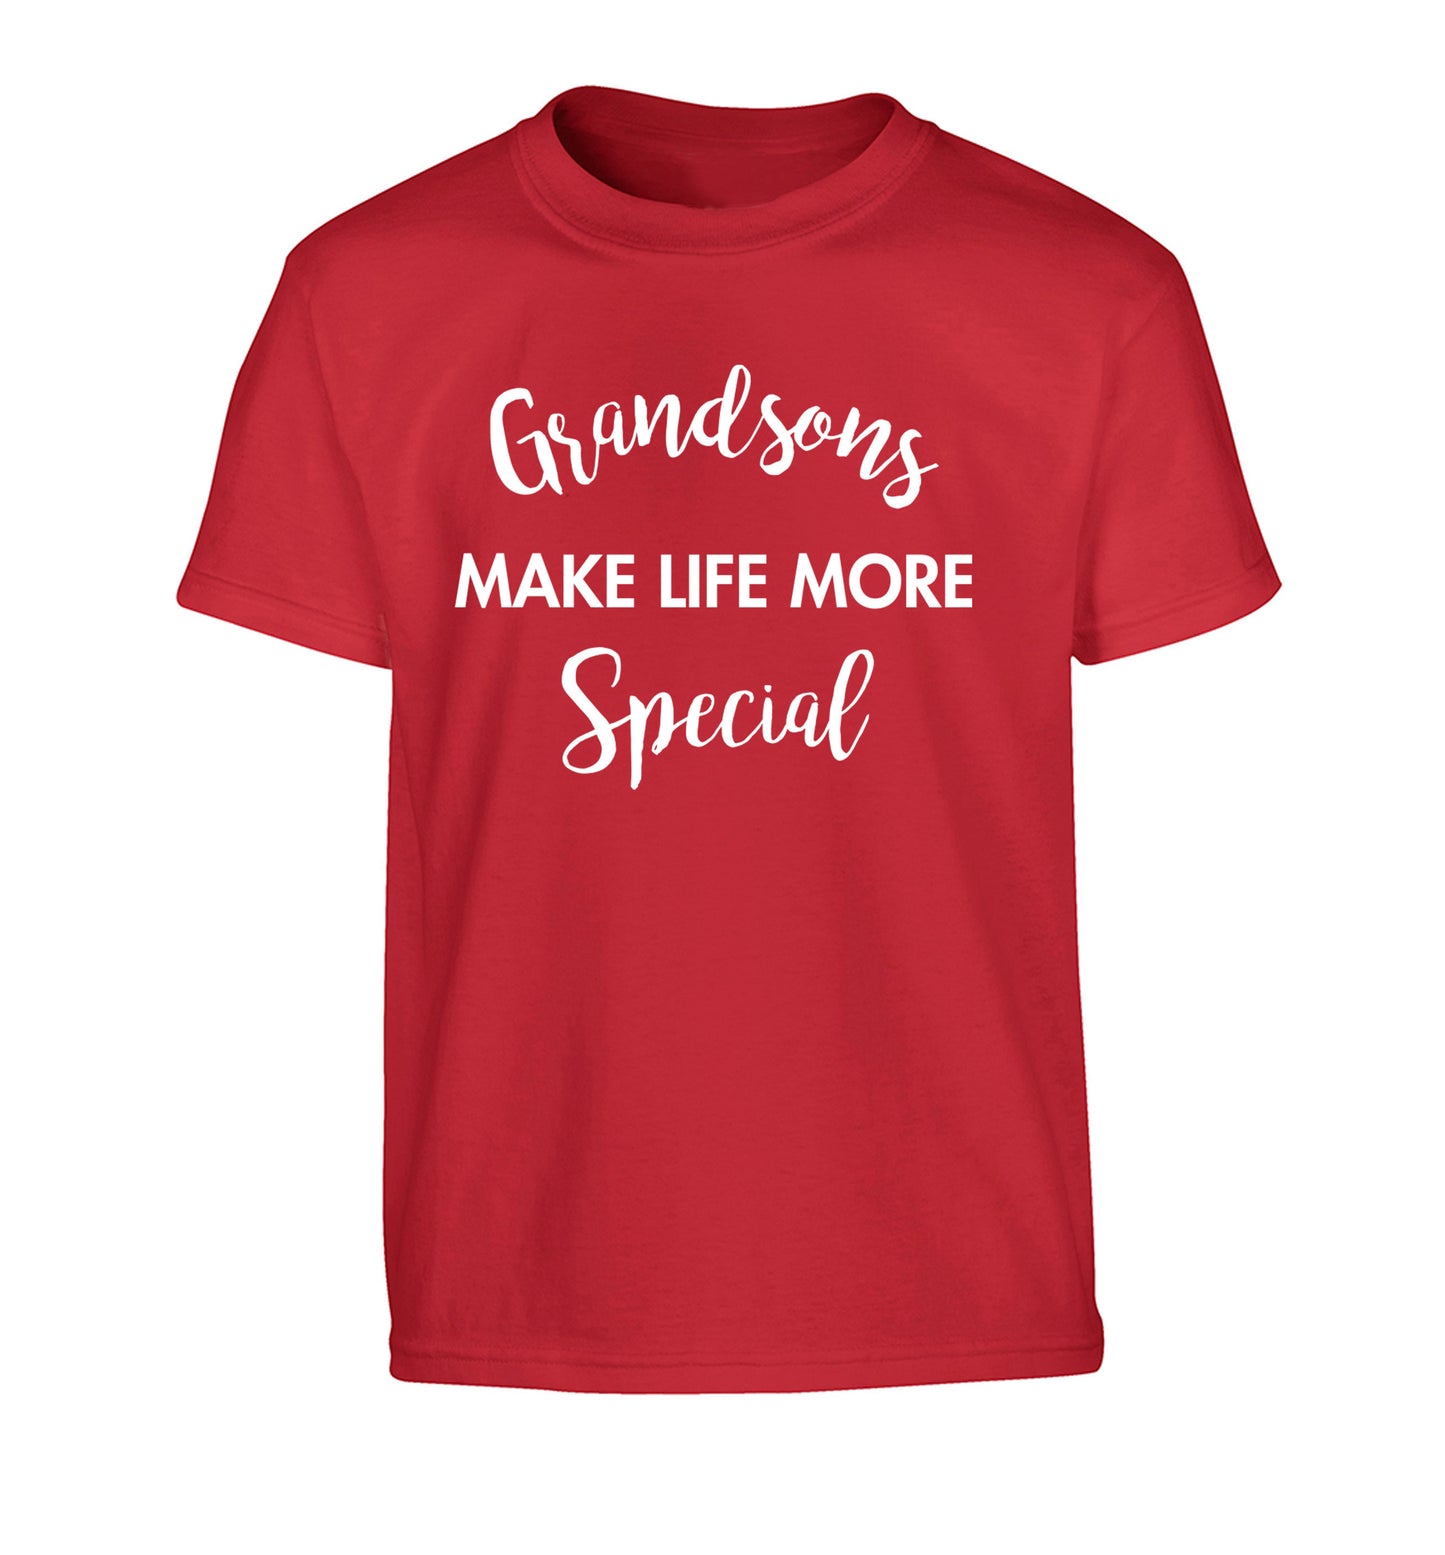 Grandsons make life more special Children's red Tshirt 12-14 Years